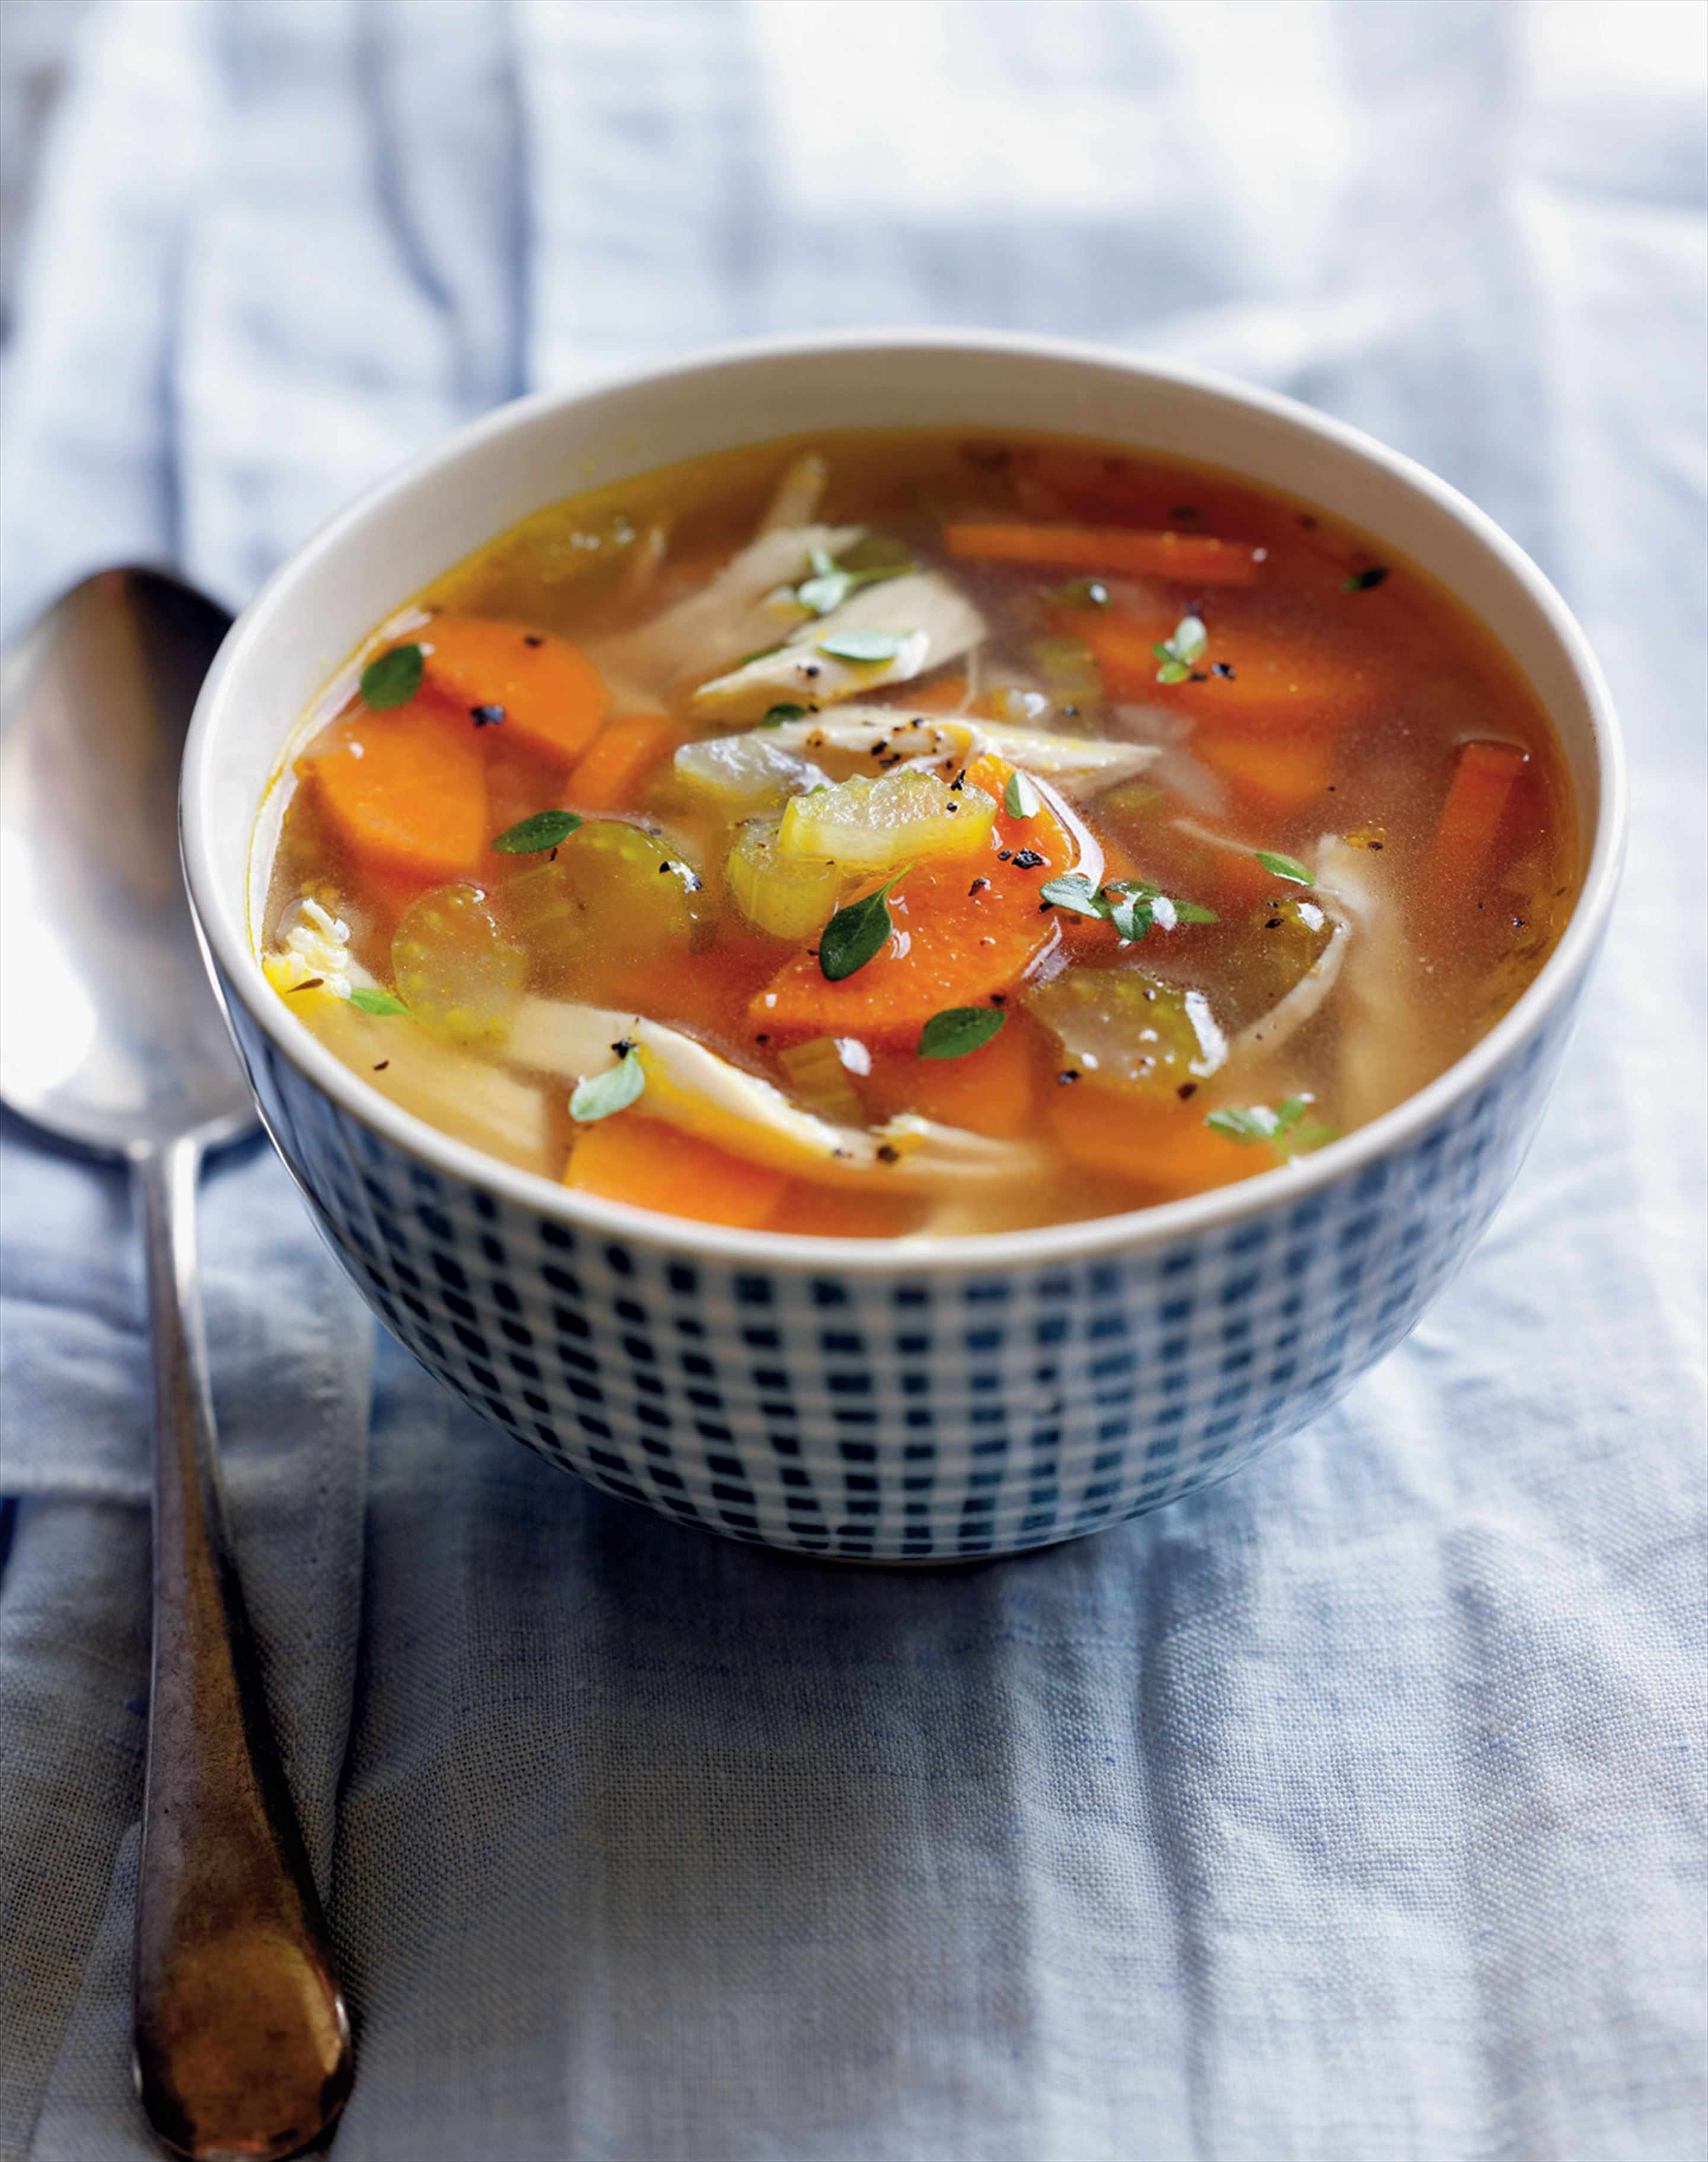 Chicken soup with carrot, lemon and thyme